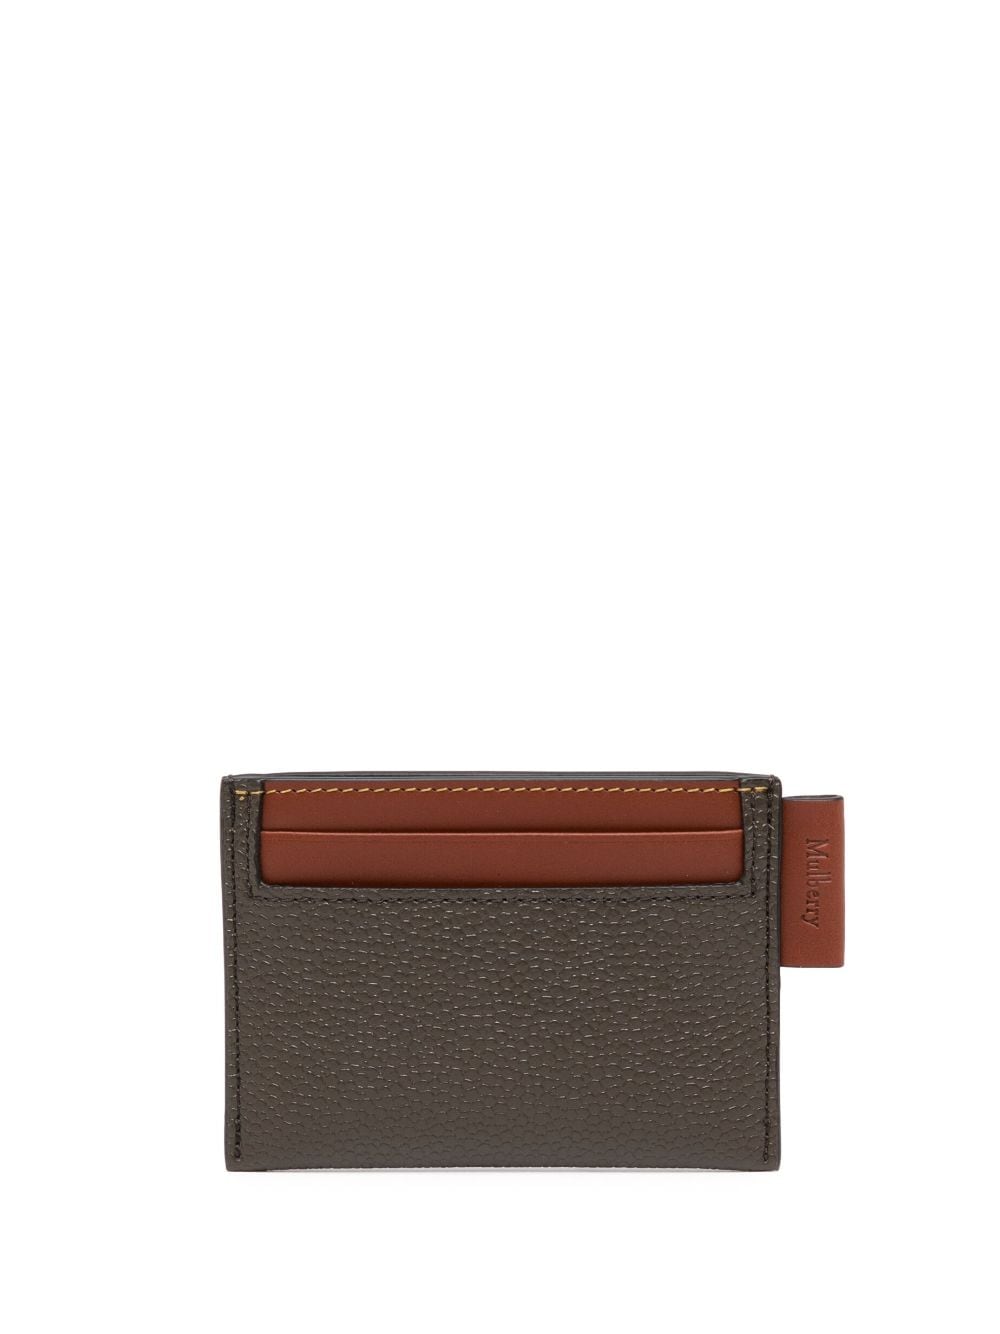 Mulberry logo-tag leather cardholder - Brown von Mulberry